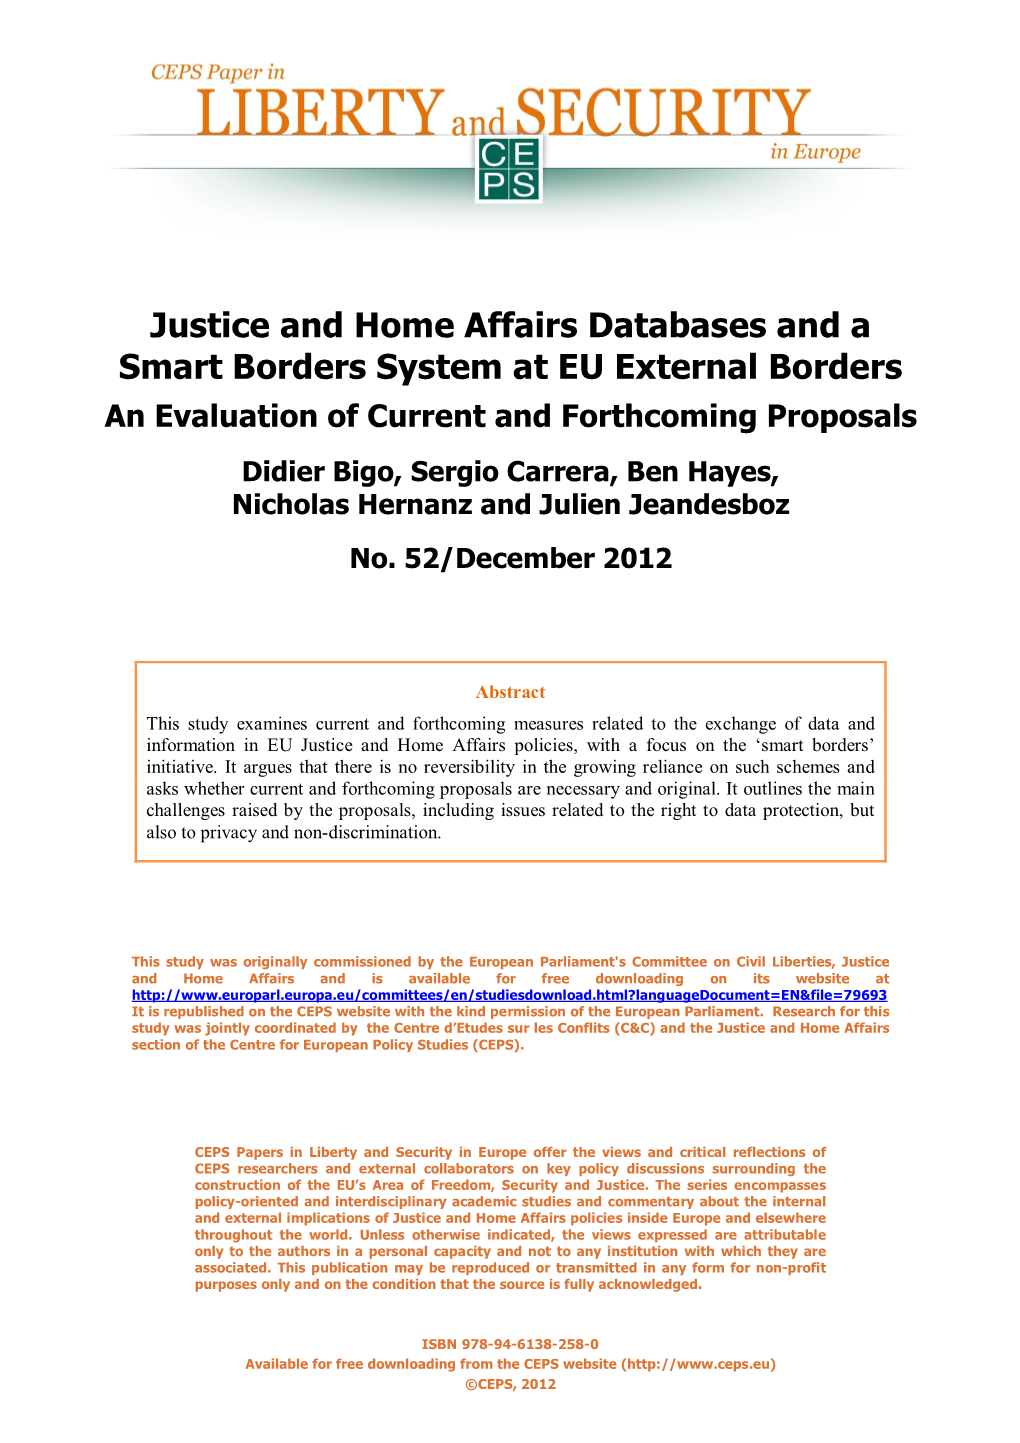 Justice and Home Affairs Databases and a Smart Borders System at EU